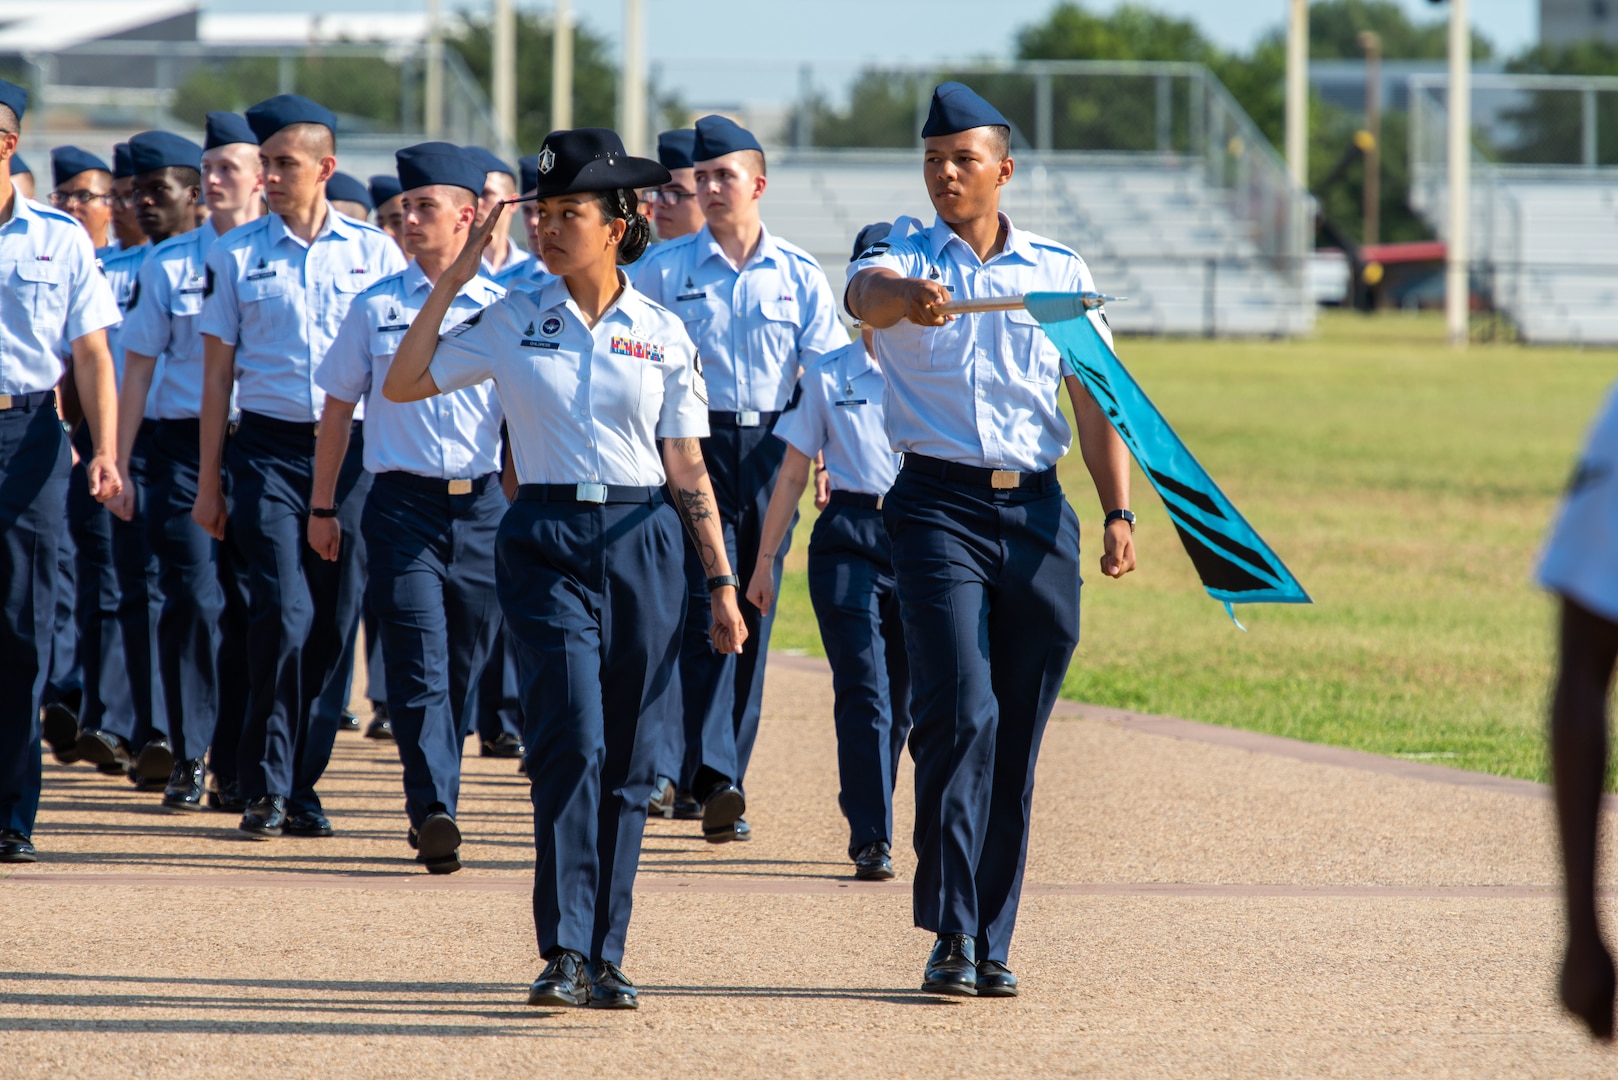 U.S. Space Force Guardians graduating from Basic Military Training (BMT) march in formation during a graduation ceremony at Joint Base San Antonio–Lackland, Texas, on June 22, 2023.